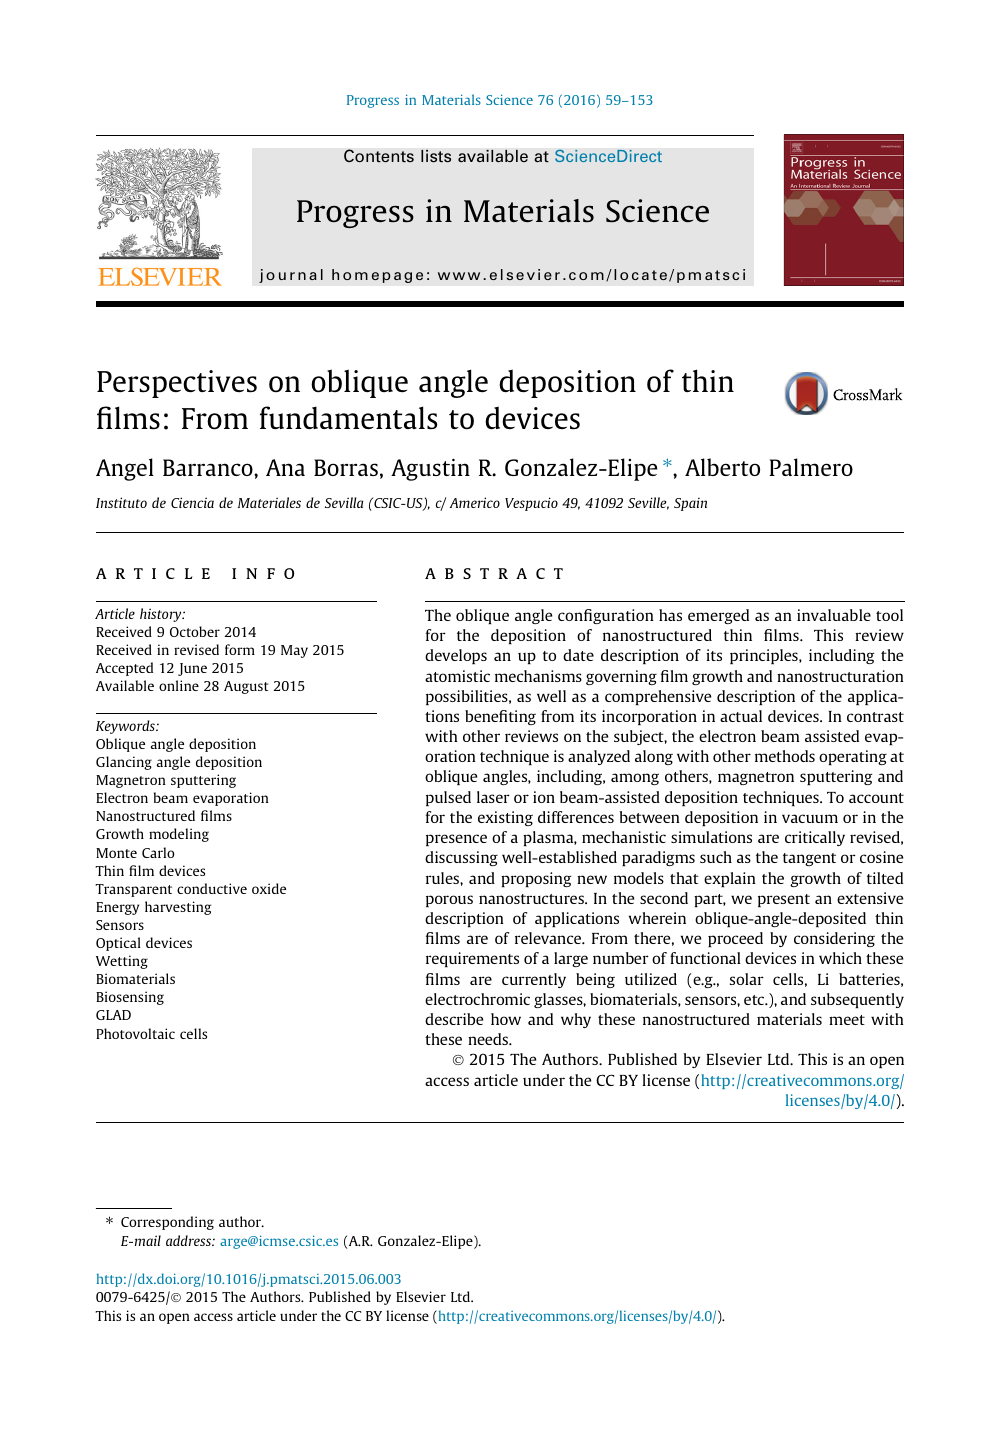 Perspectives On Oblique Angle Deposition Of Thin Films From Fundamentals To Devices Topic Of Research Paper In Nano Technology Download Scholarly Article Pdf And Read For Free On Cyberleninka Open Science Hub